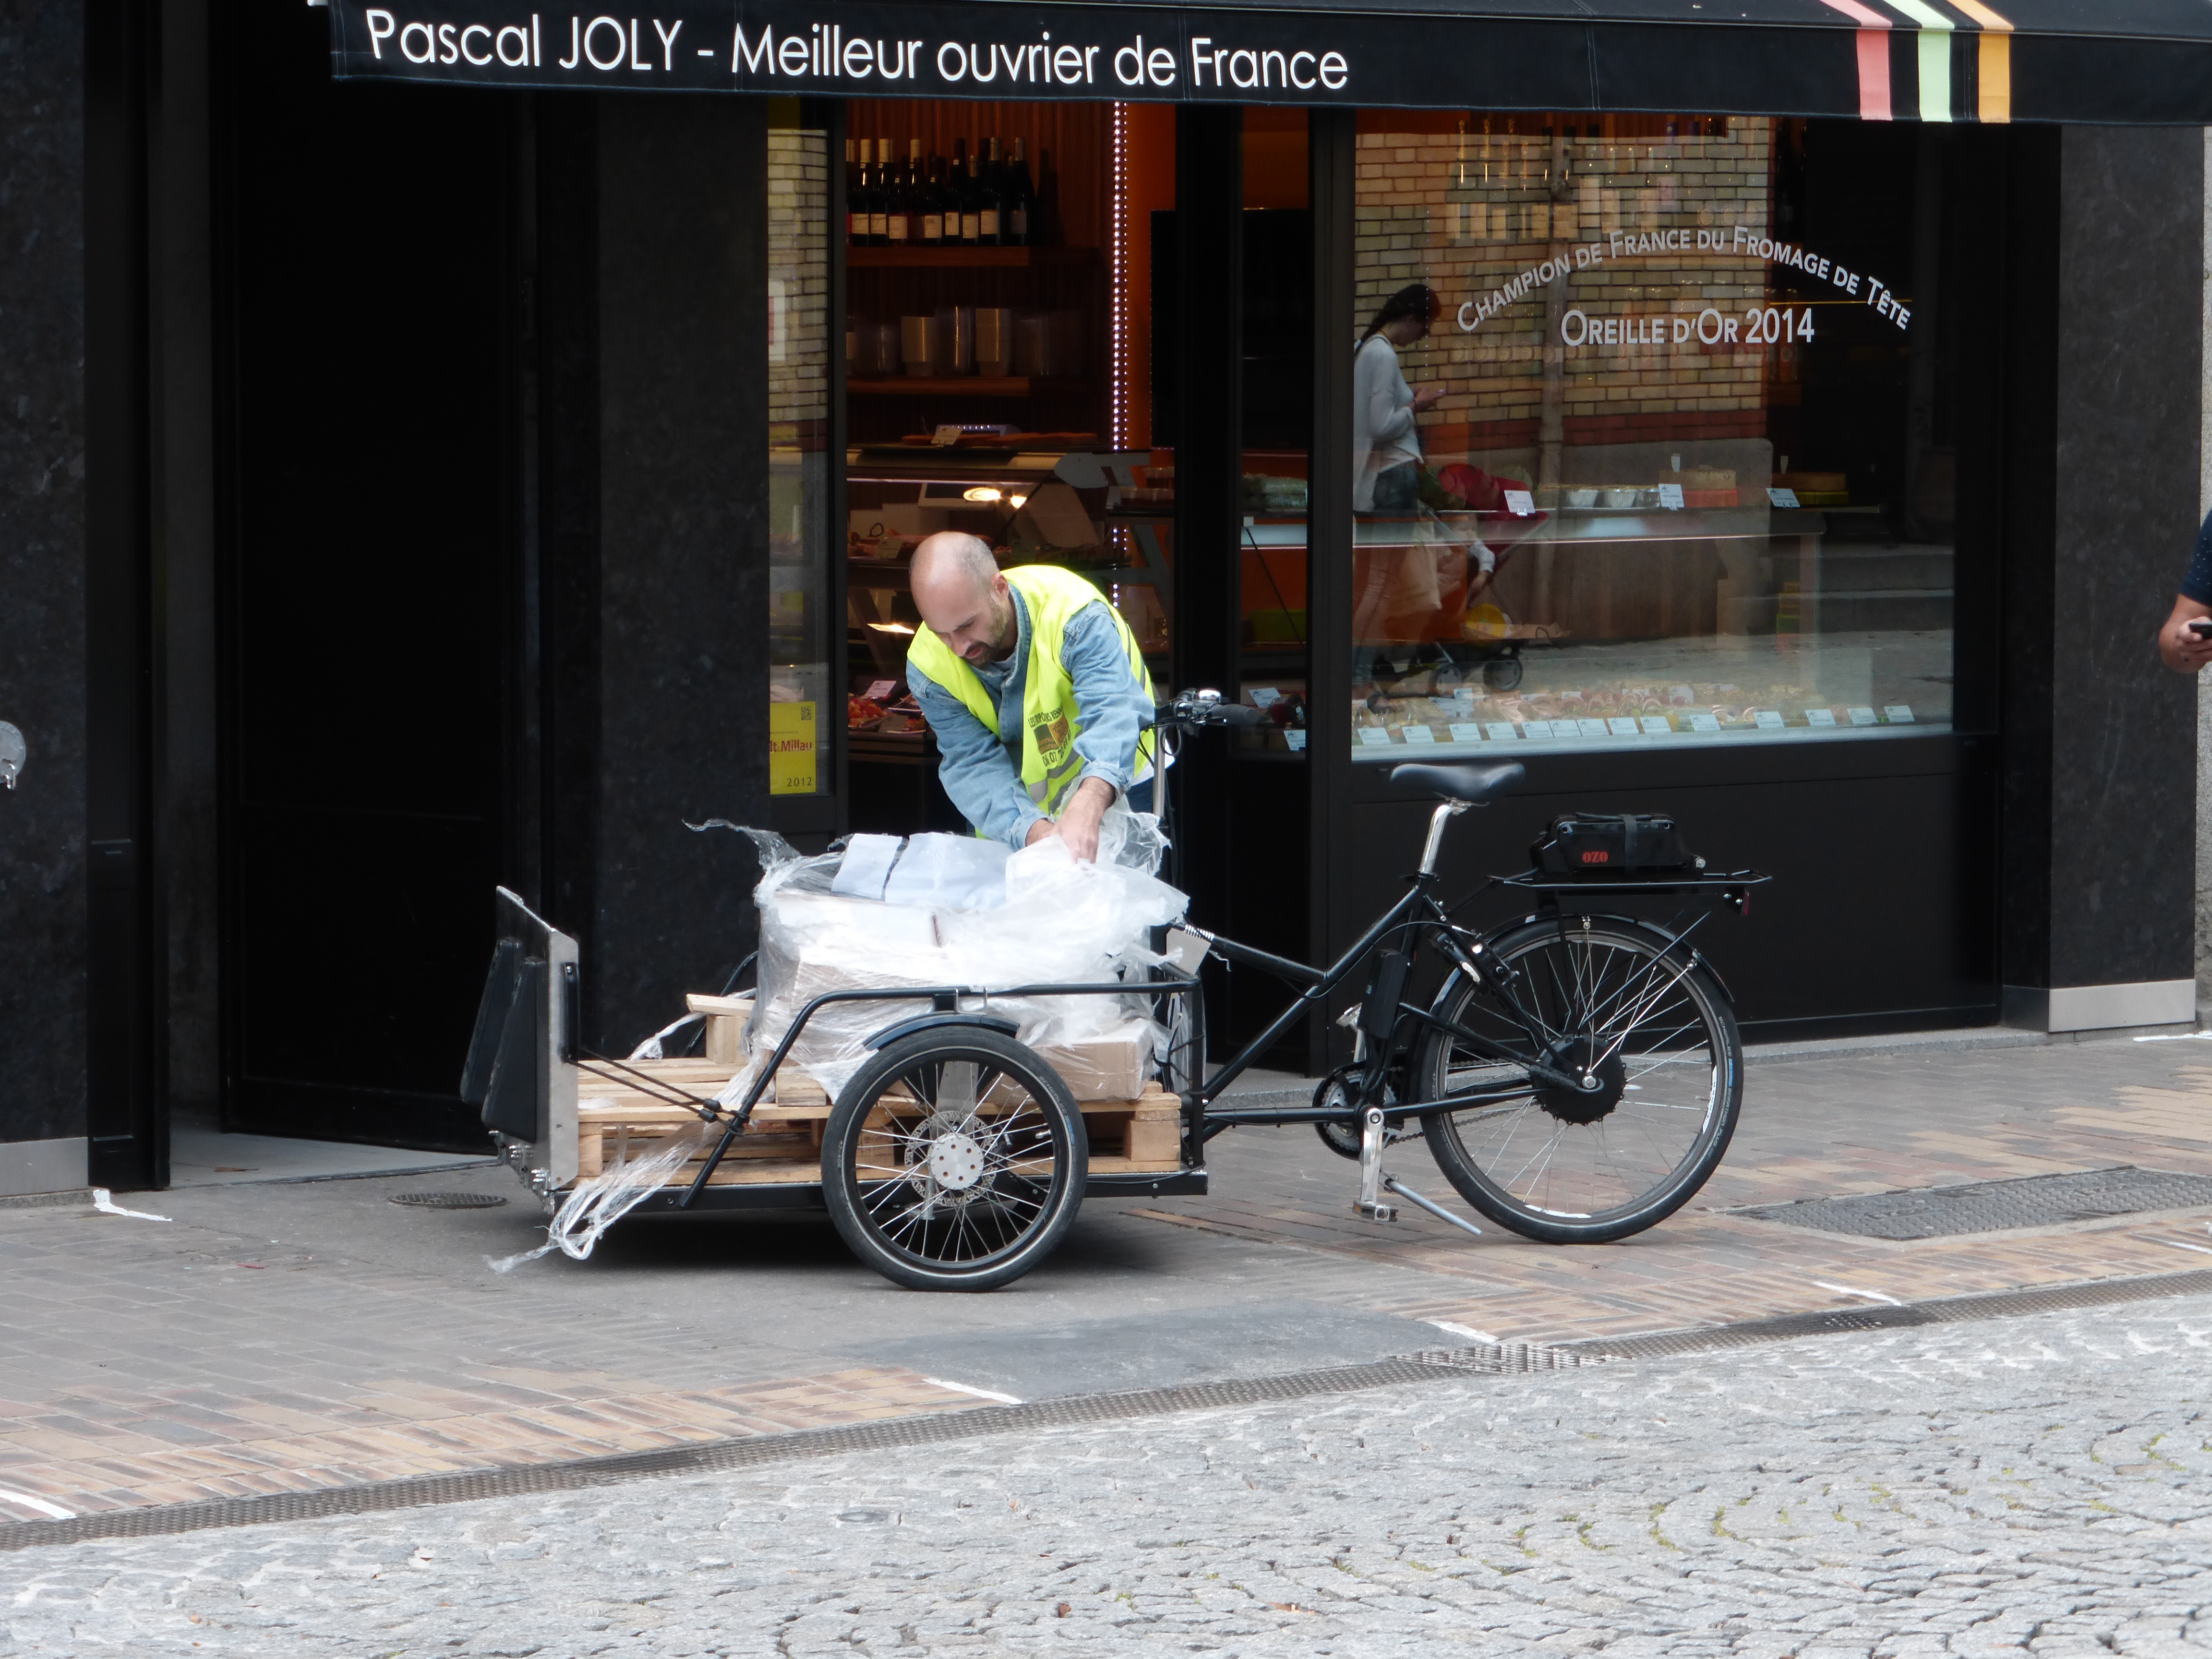 A man wearing a yellow jacket is unloading a cargo bike parked on the sidewalk, street is made of cobbles 